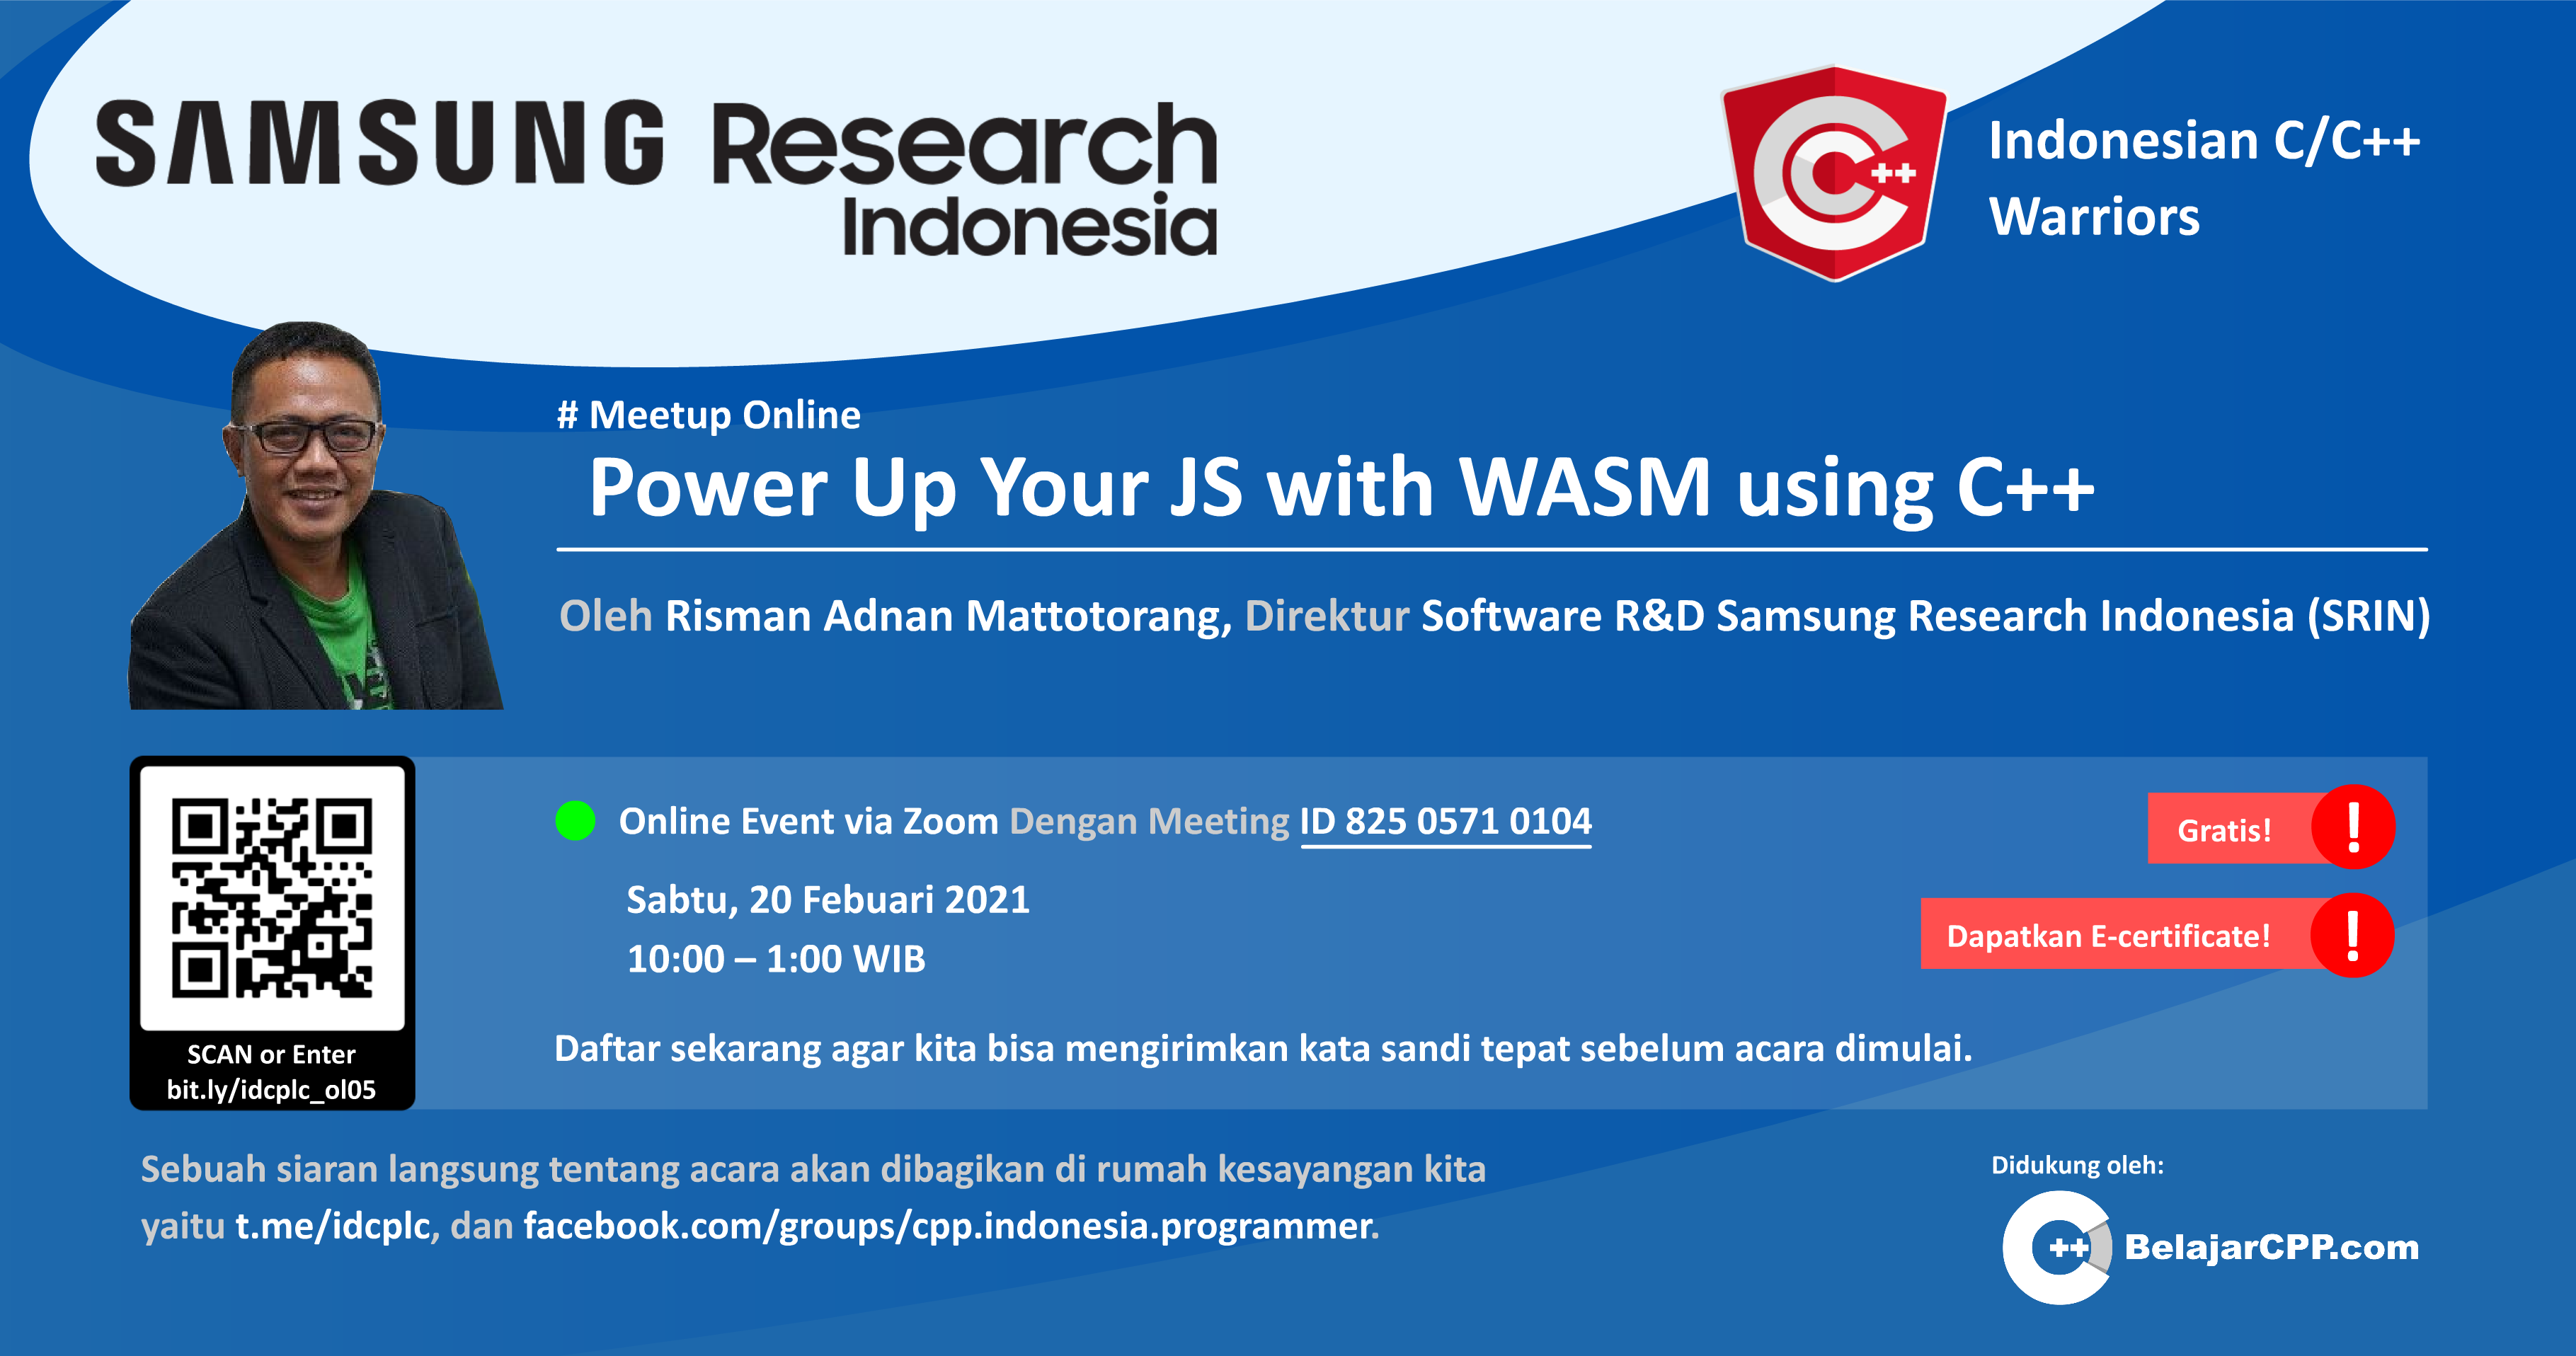 Power Up Your JS with WASM using C++ - Indonesian C/C++ Warriors Online Meetup - February 20, 2021